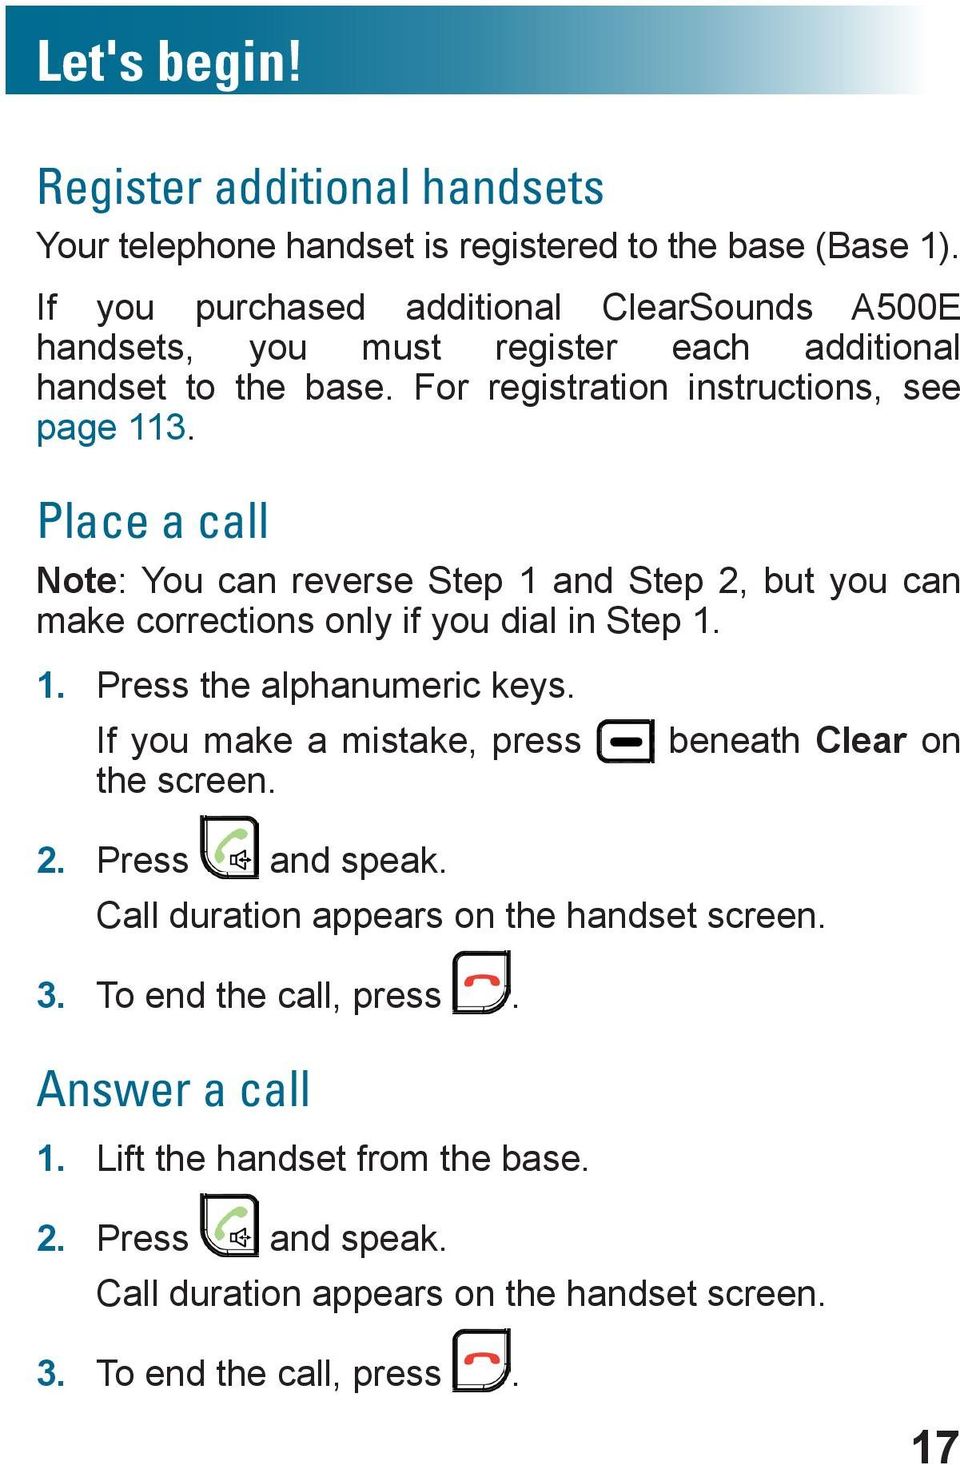 Place a call Note: You can reverse Step 1 and Step 2, but you can make corrections only if you dial in Step 1. 1. Press the alphanumeric keys.